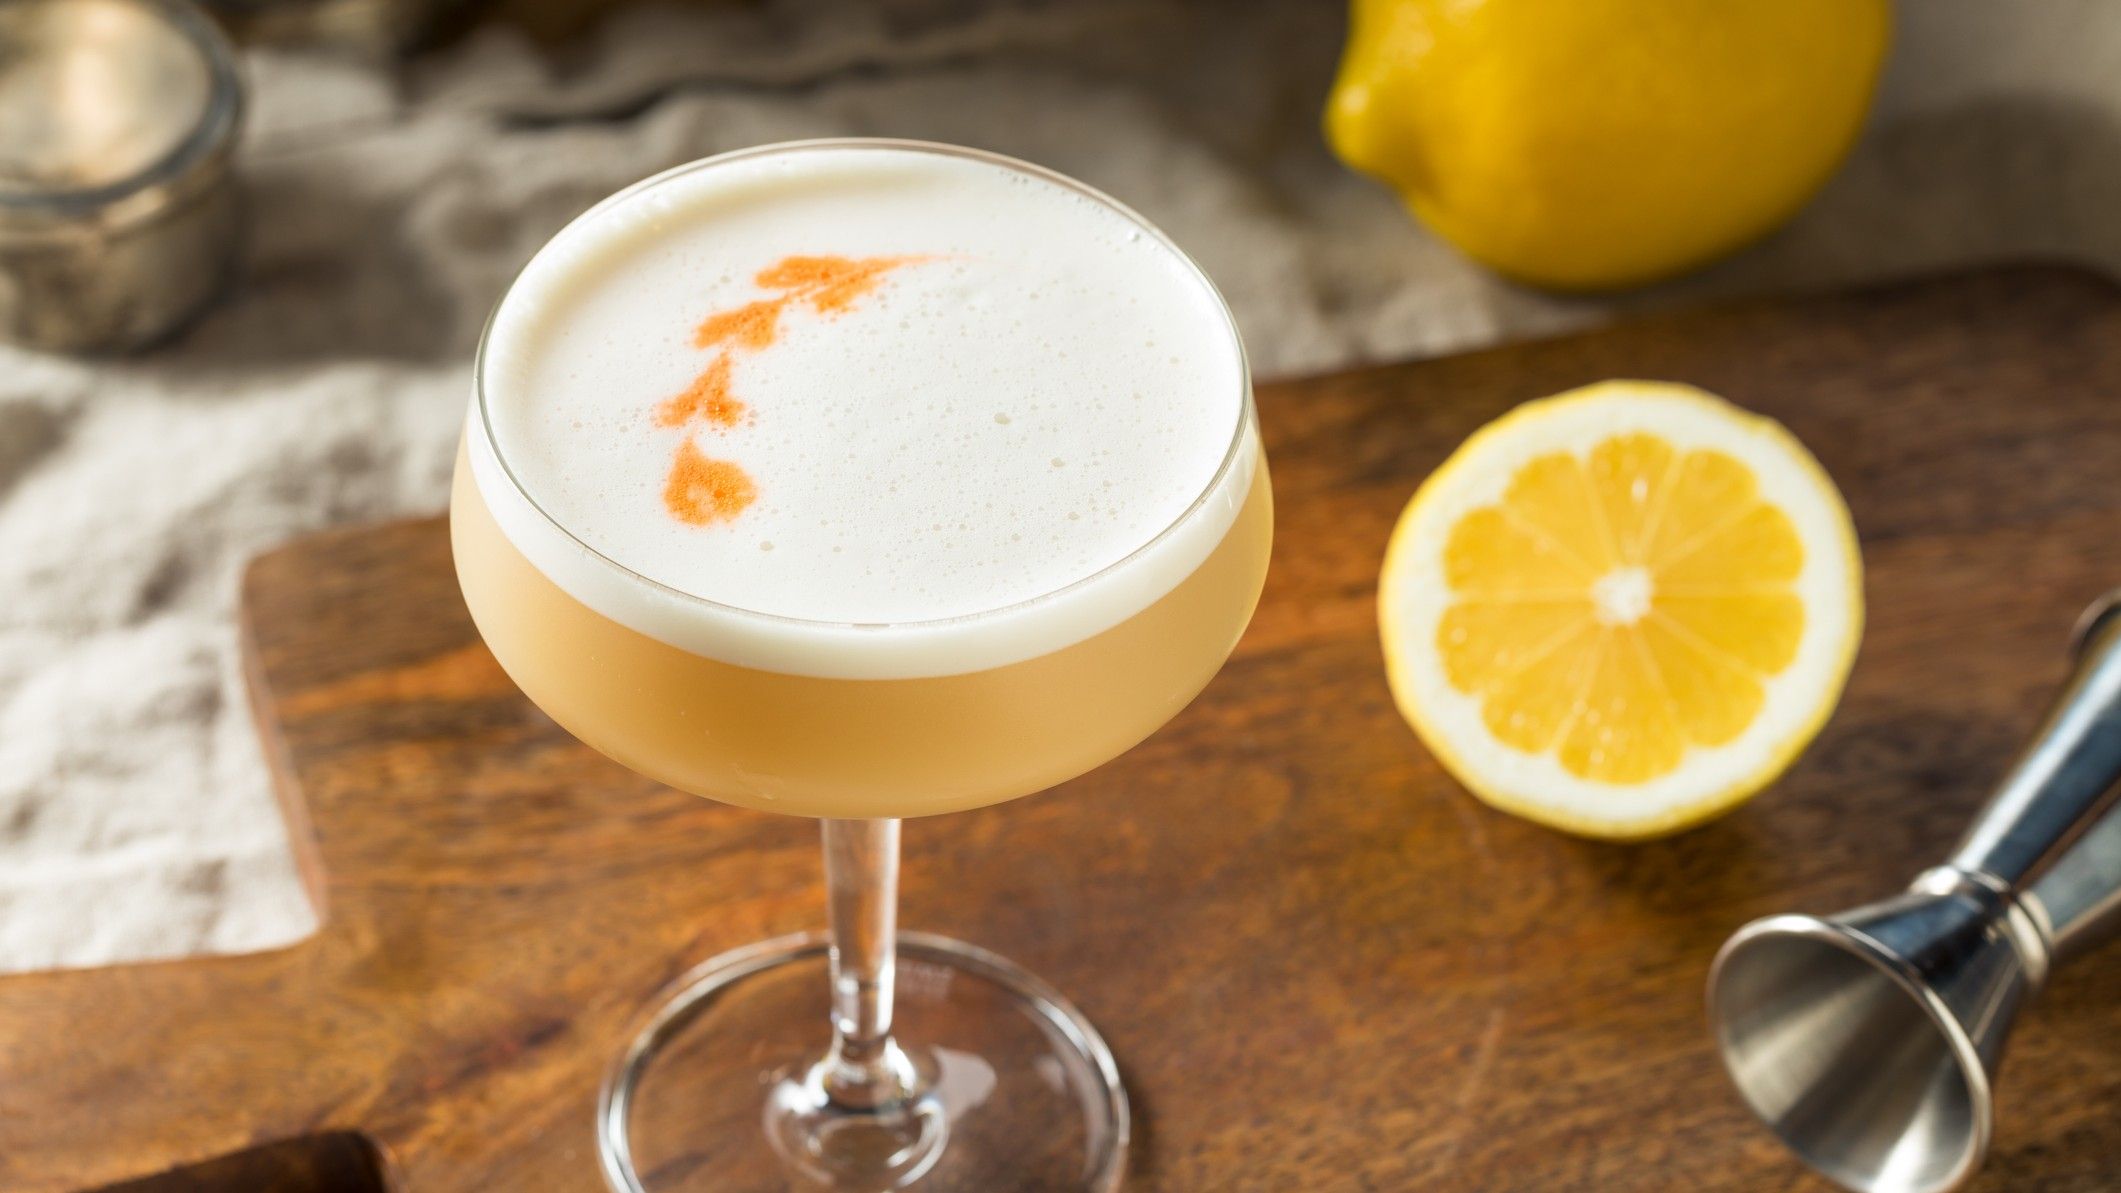 Pisco sours, which contain egg whites, are delicious. But are they safe to drink? (Getty)